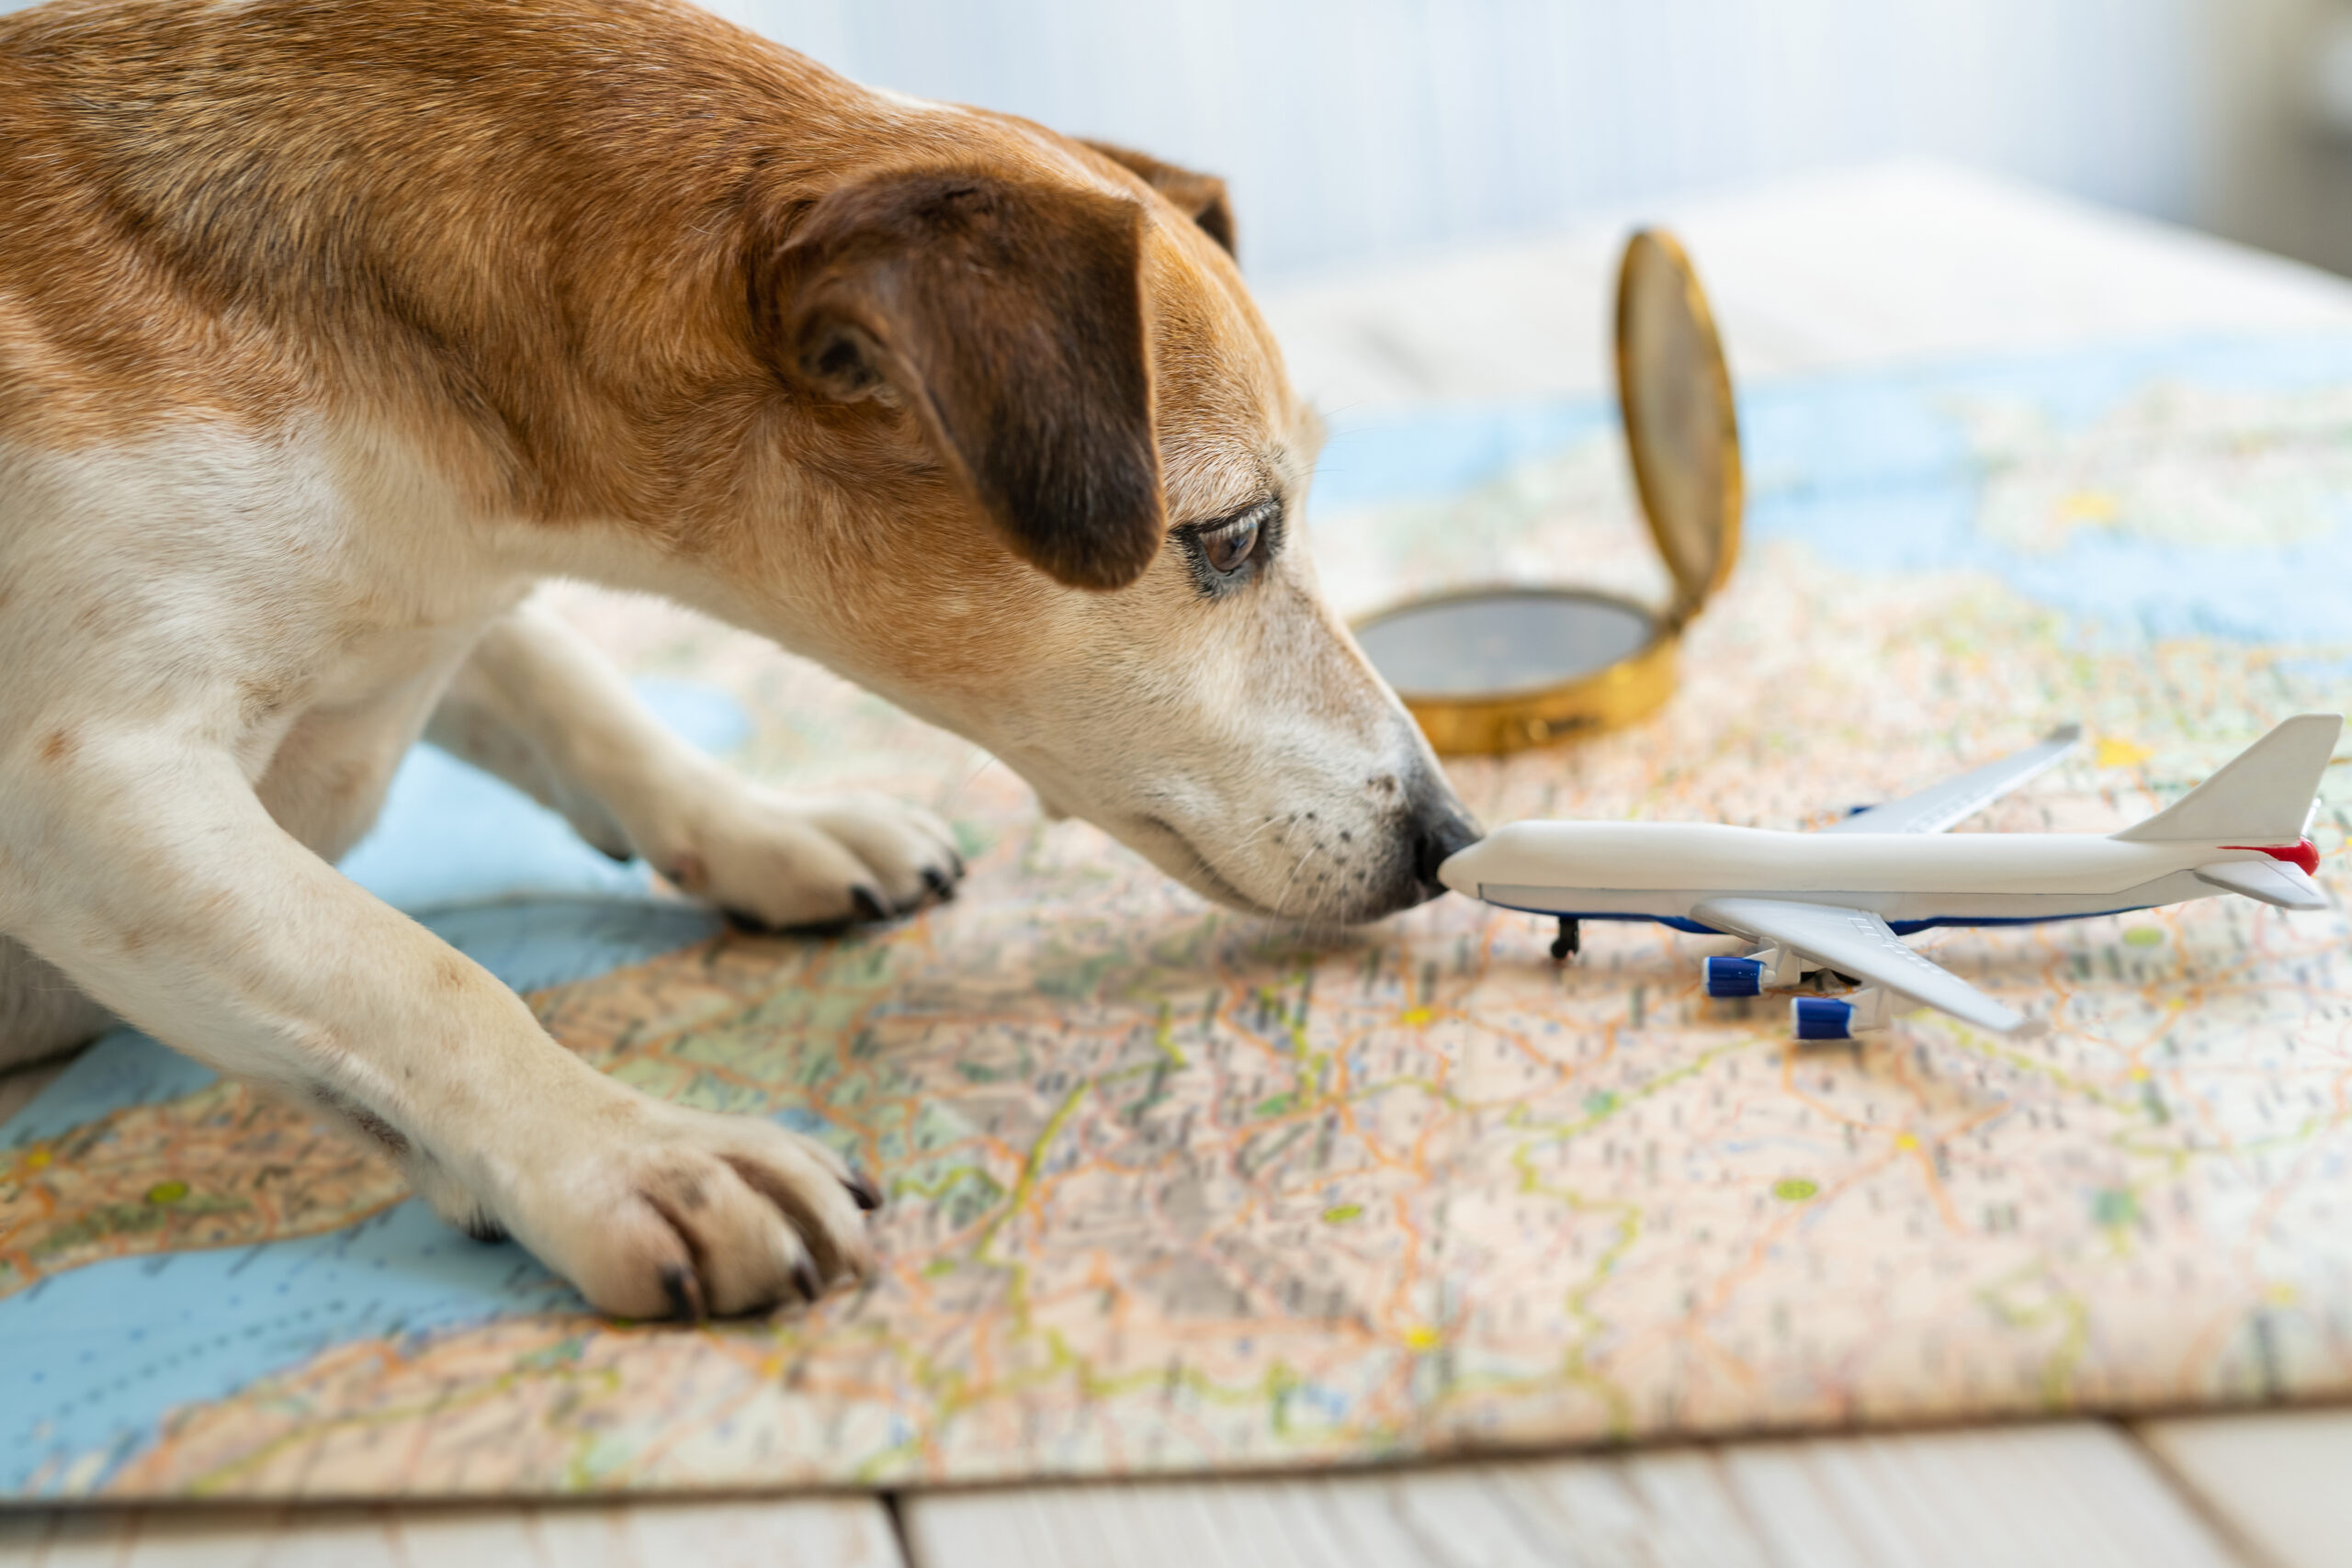 Jack Russell dog with toy airplane and map